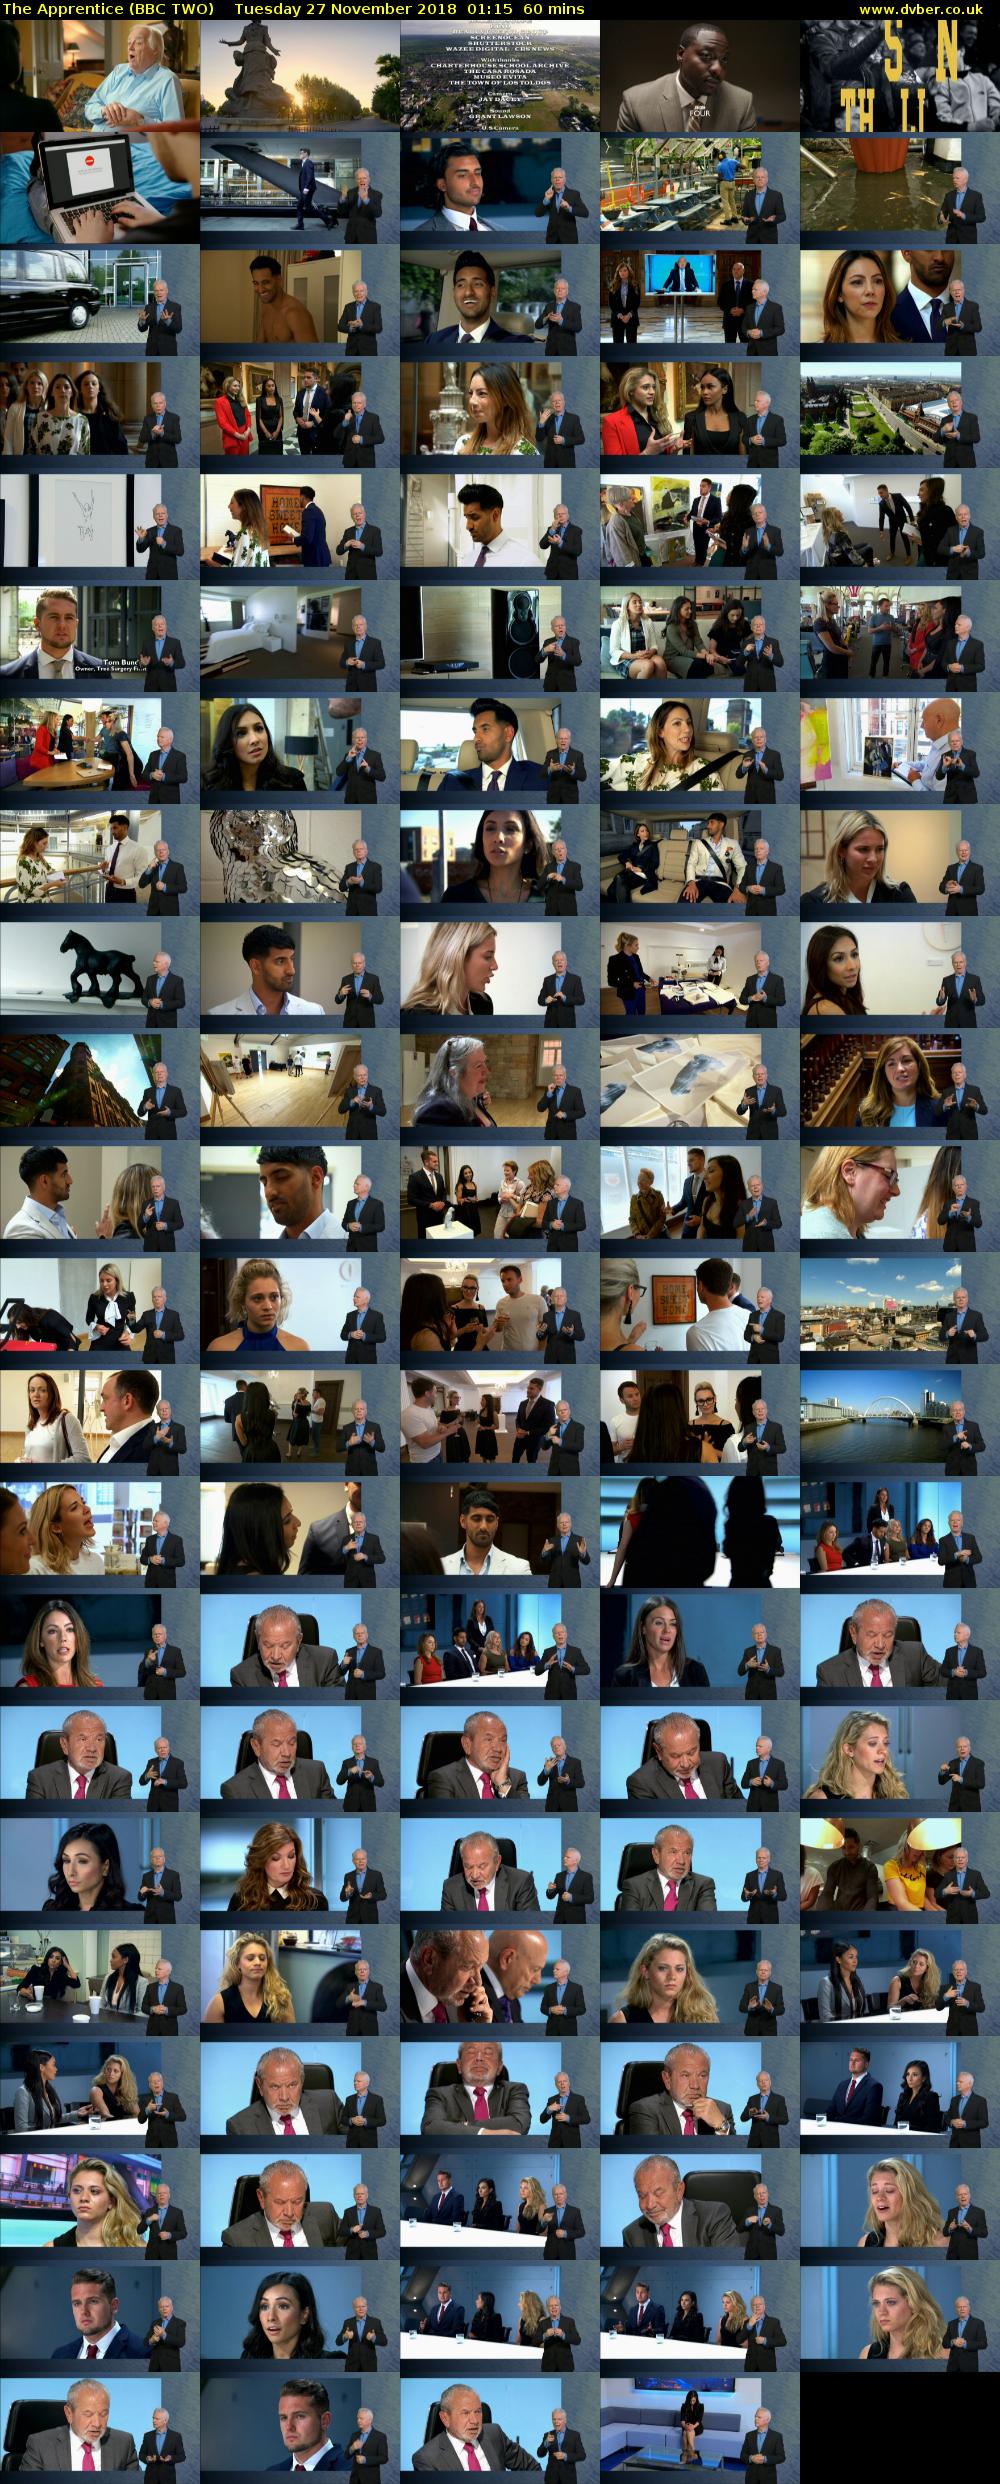 The Apprentice (BBC TWO) Tuesday 27 November 2018 01:15 - 02:15